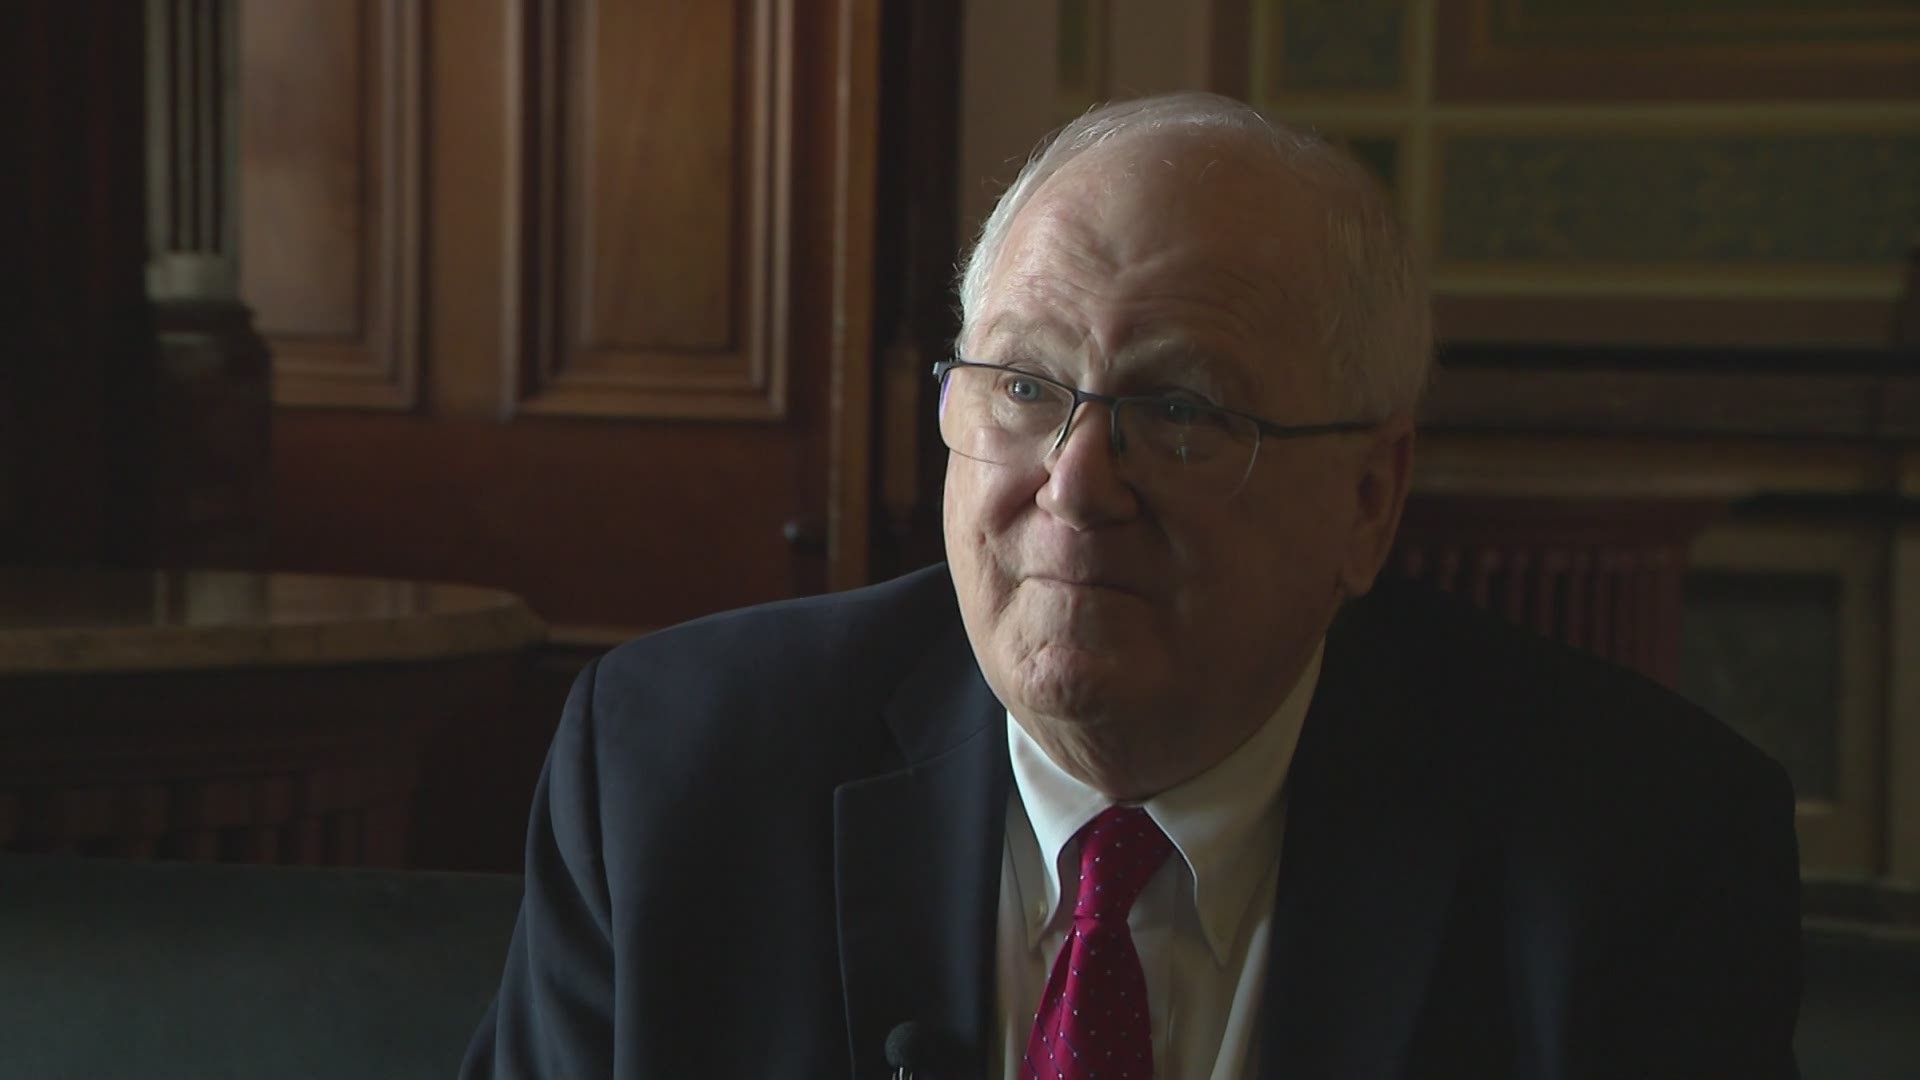 Former Ambassador Kenneth Quinn worked under Gov. Robert D. Ray when Iowa welcomed thousands of refugees in 1979.